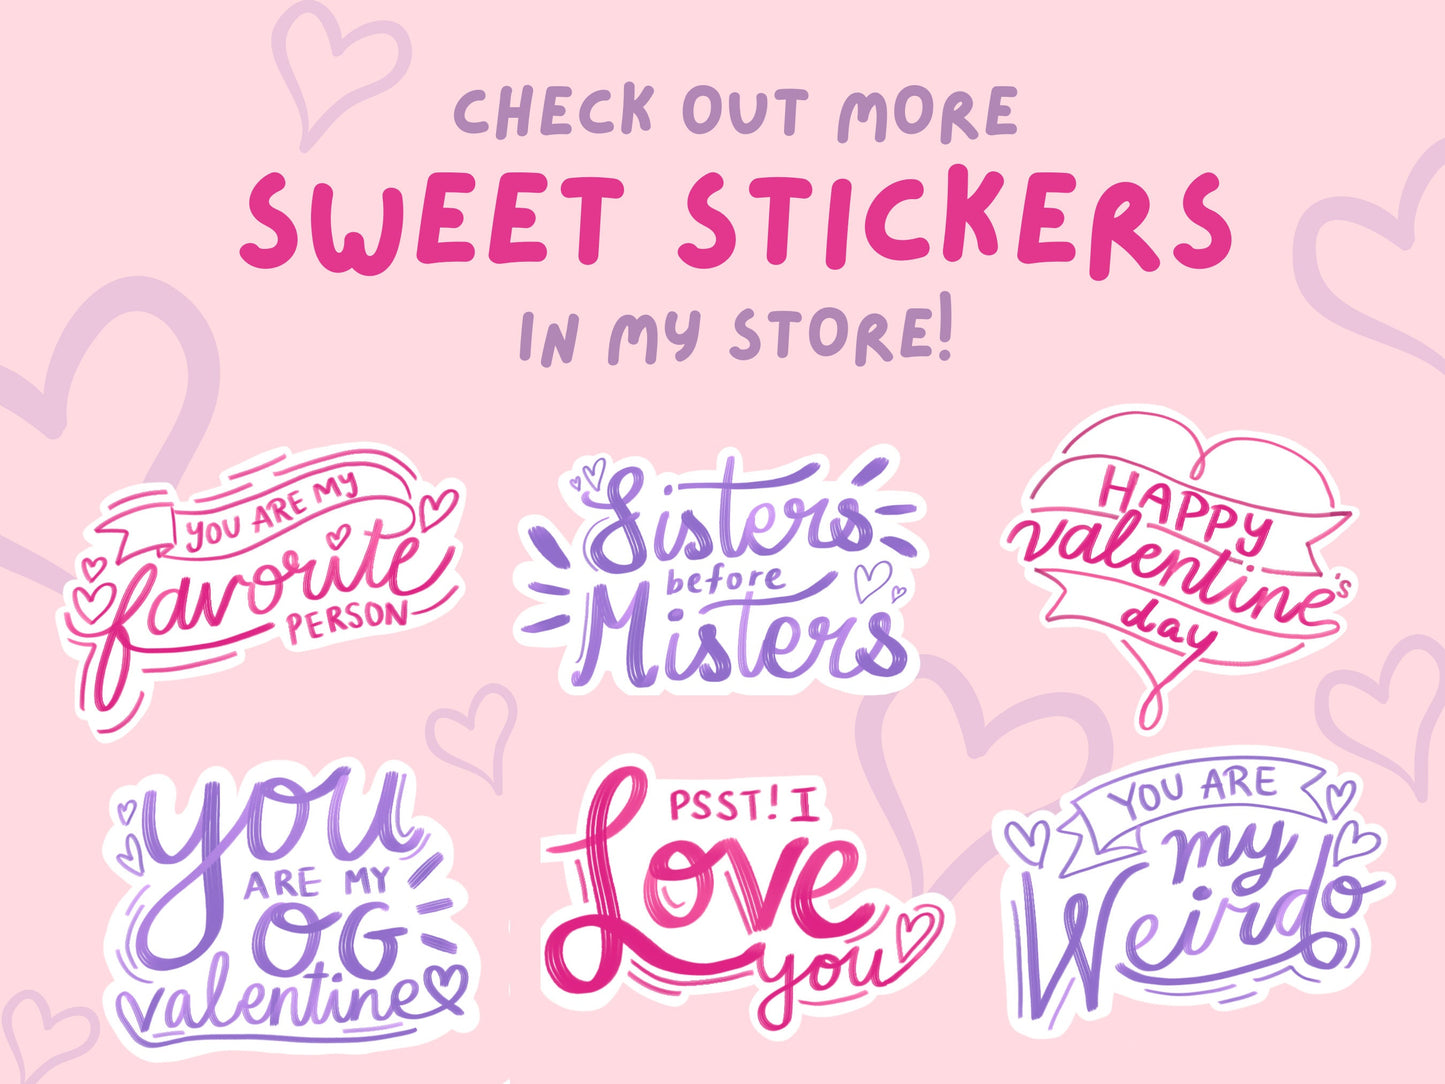 Love You A Bunch Sticker | Anniversary Gift | Love Sticker | Gifts for Her